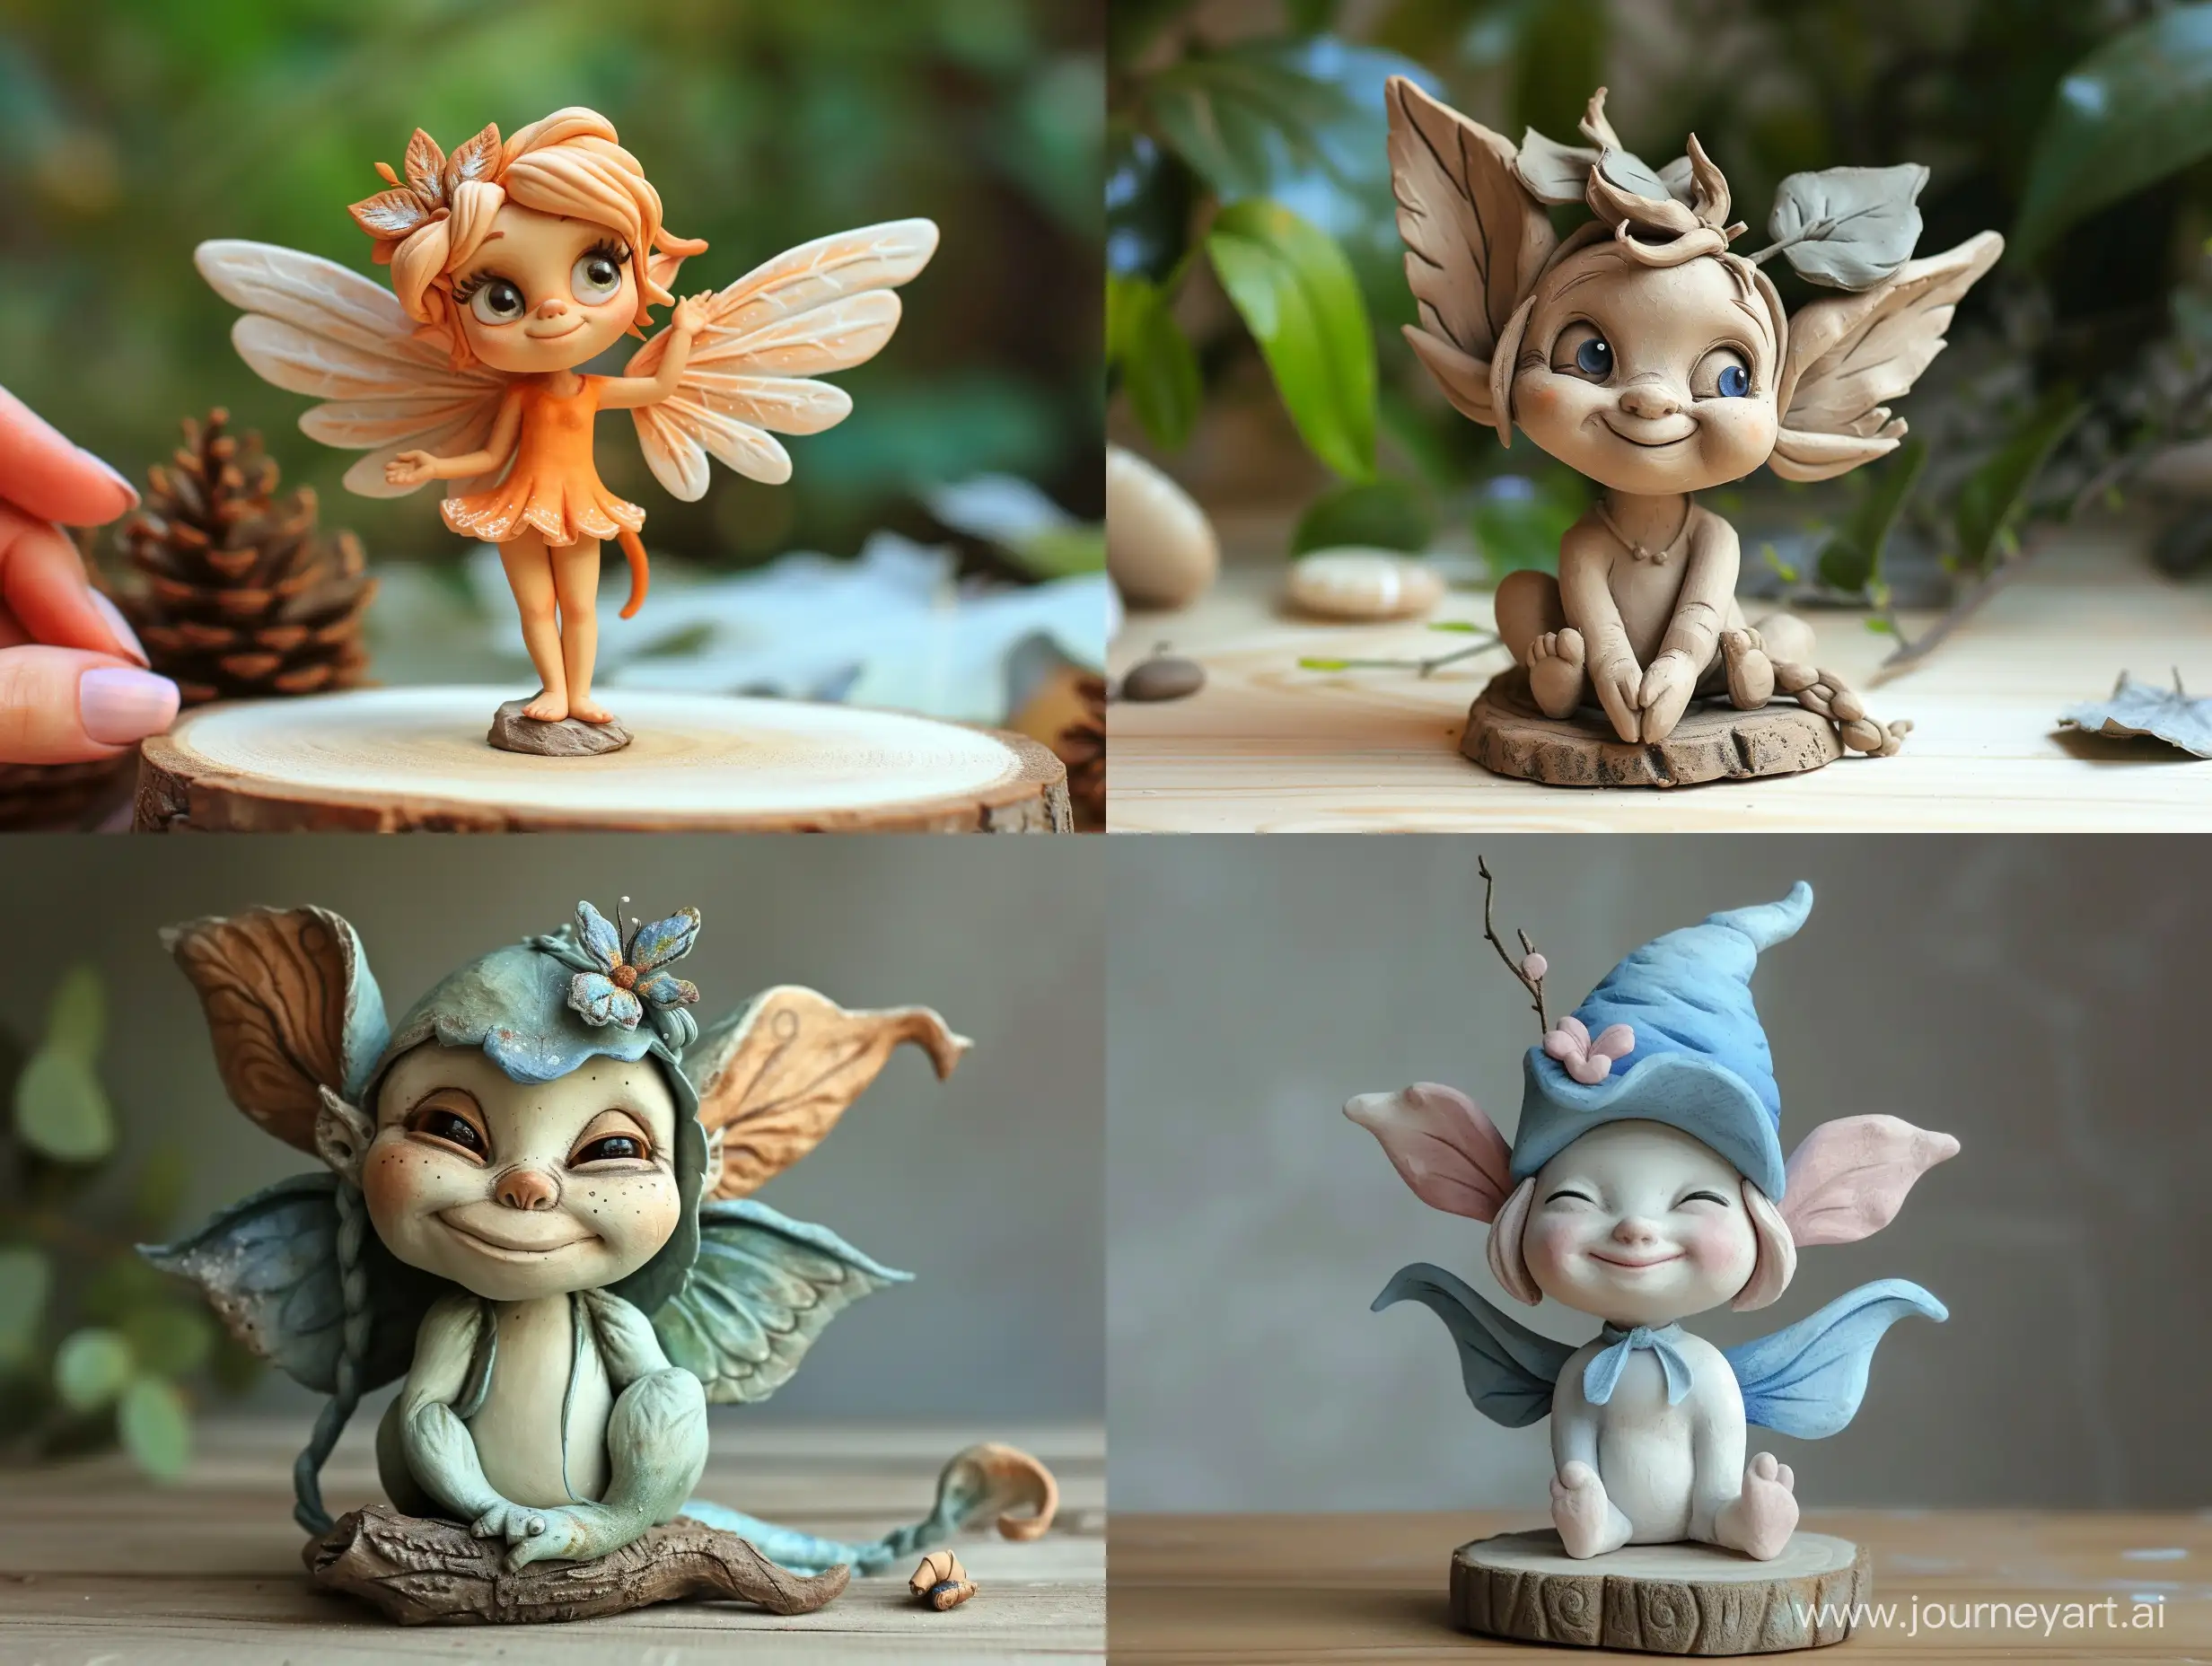 Enchanting-Clay-Statuette-of-a-Fictional-FairyTale-Character